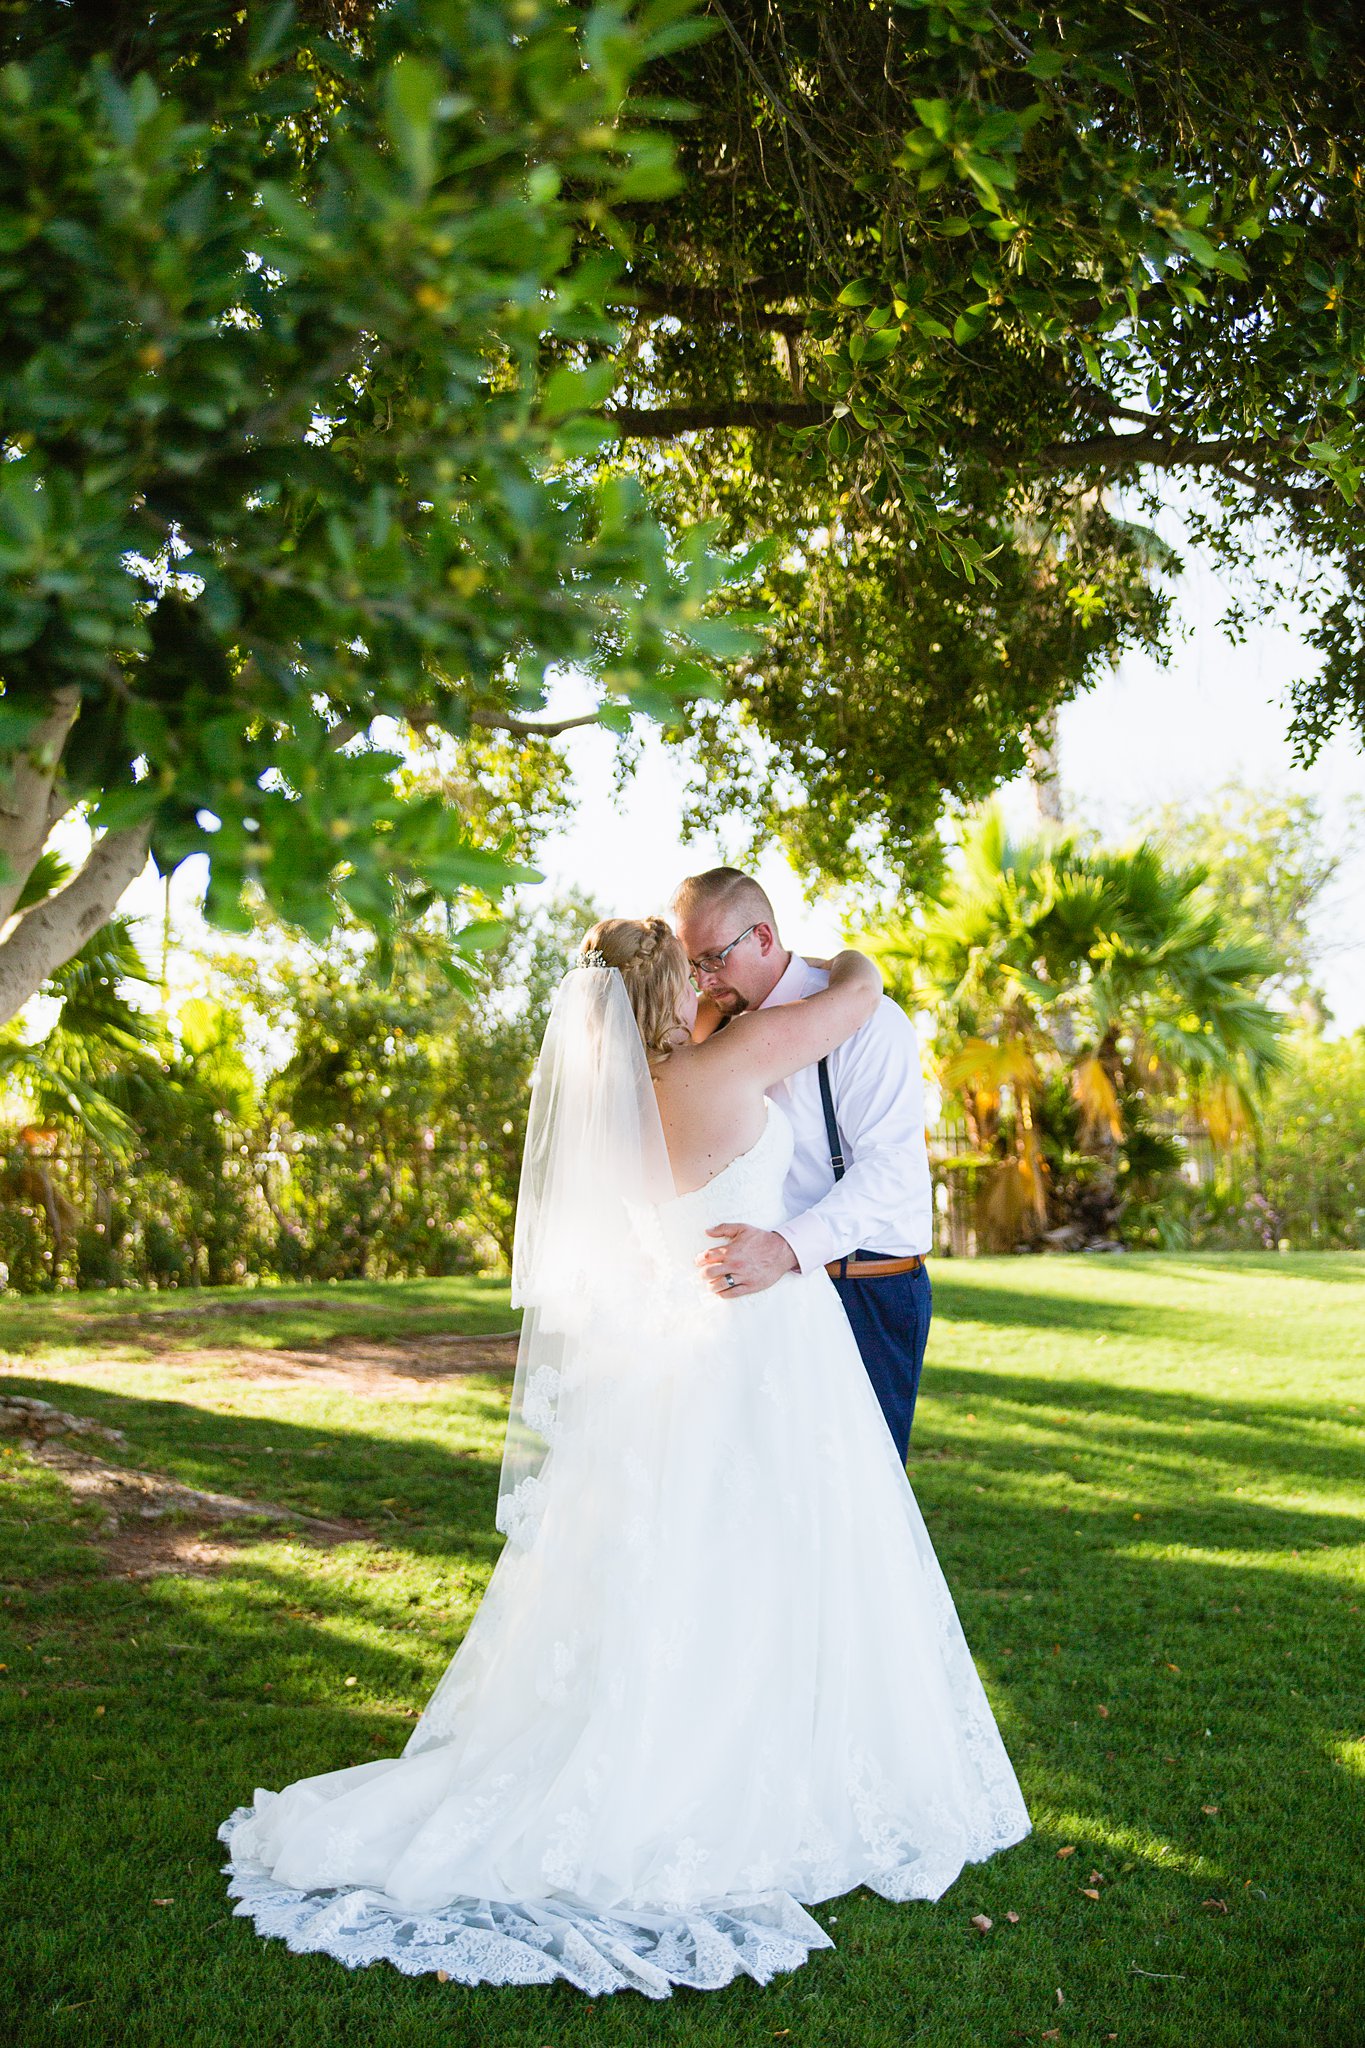 Bride and groom share an intimate moment during their Val Vista Lakes wedding by Gilbert engagement photographer PMA Photography.